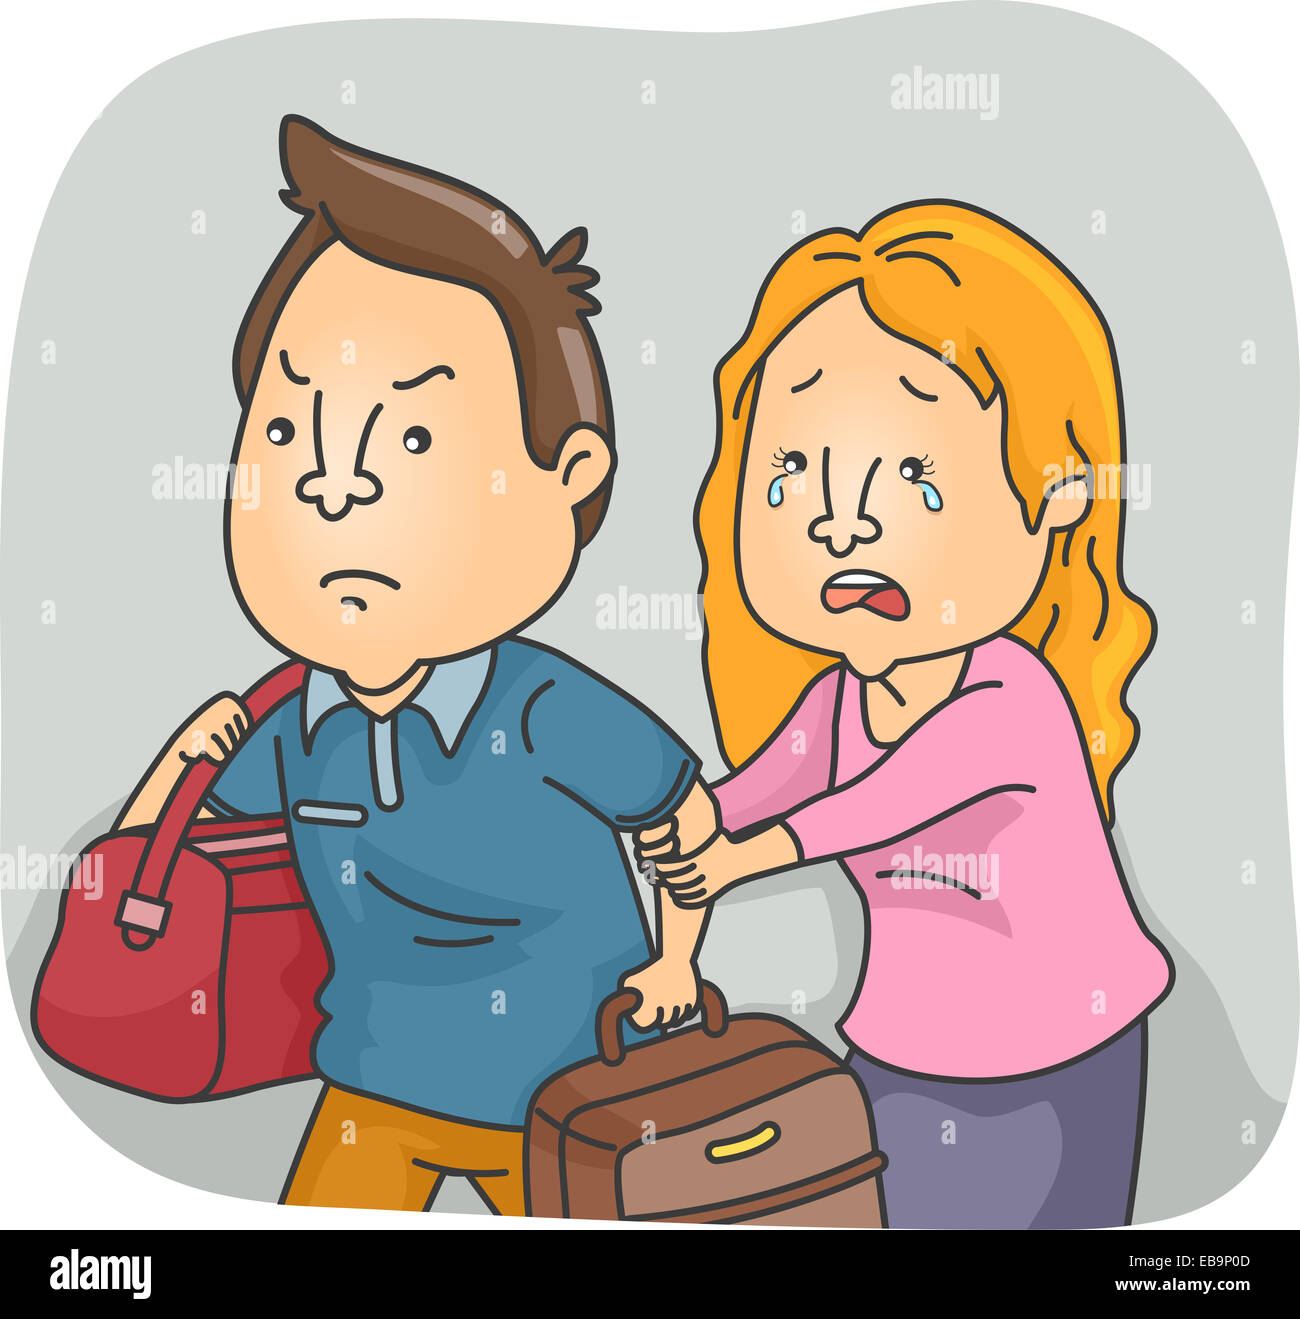 Illustration Featuring a Husband Leaving His Wife Stock Photo